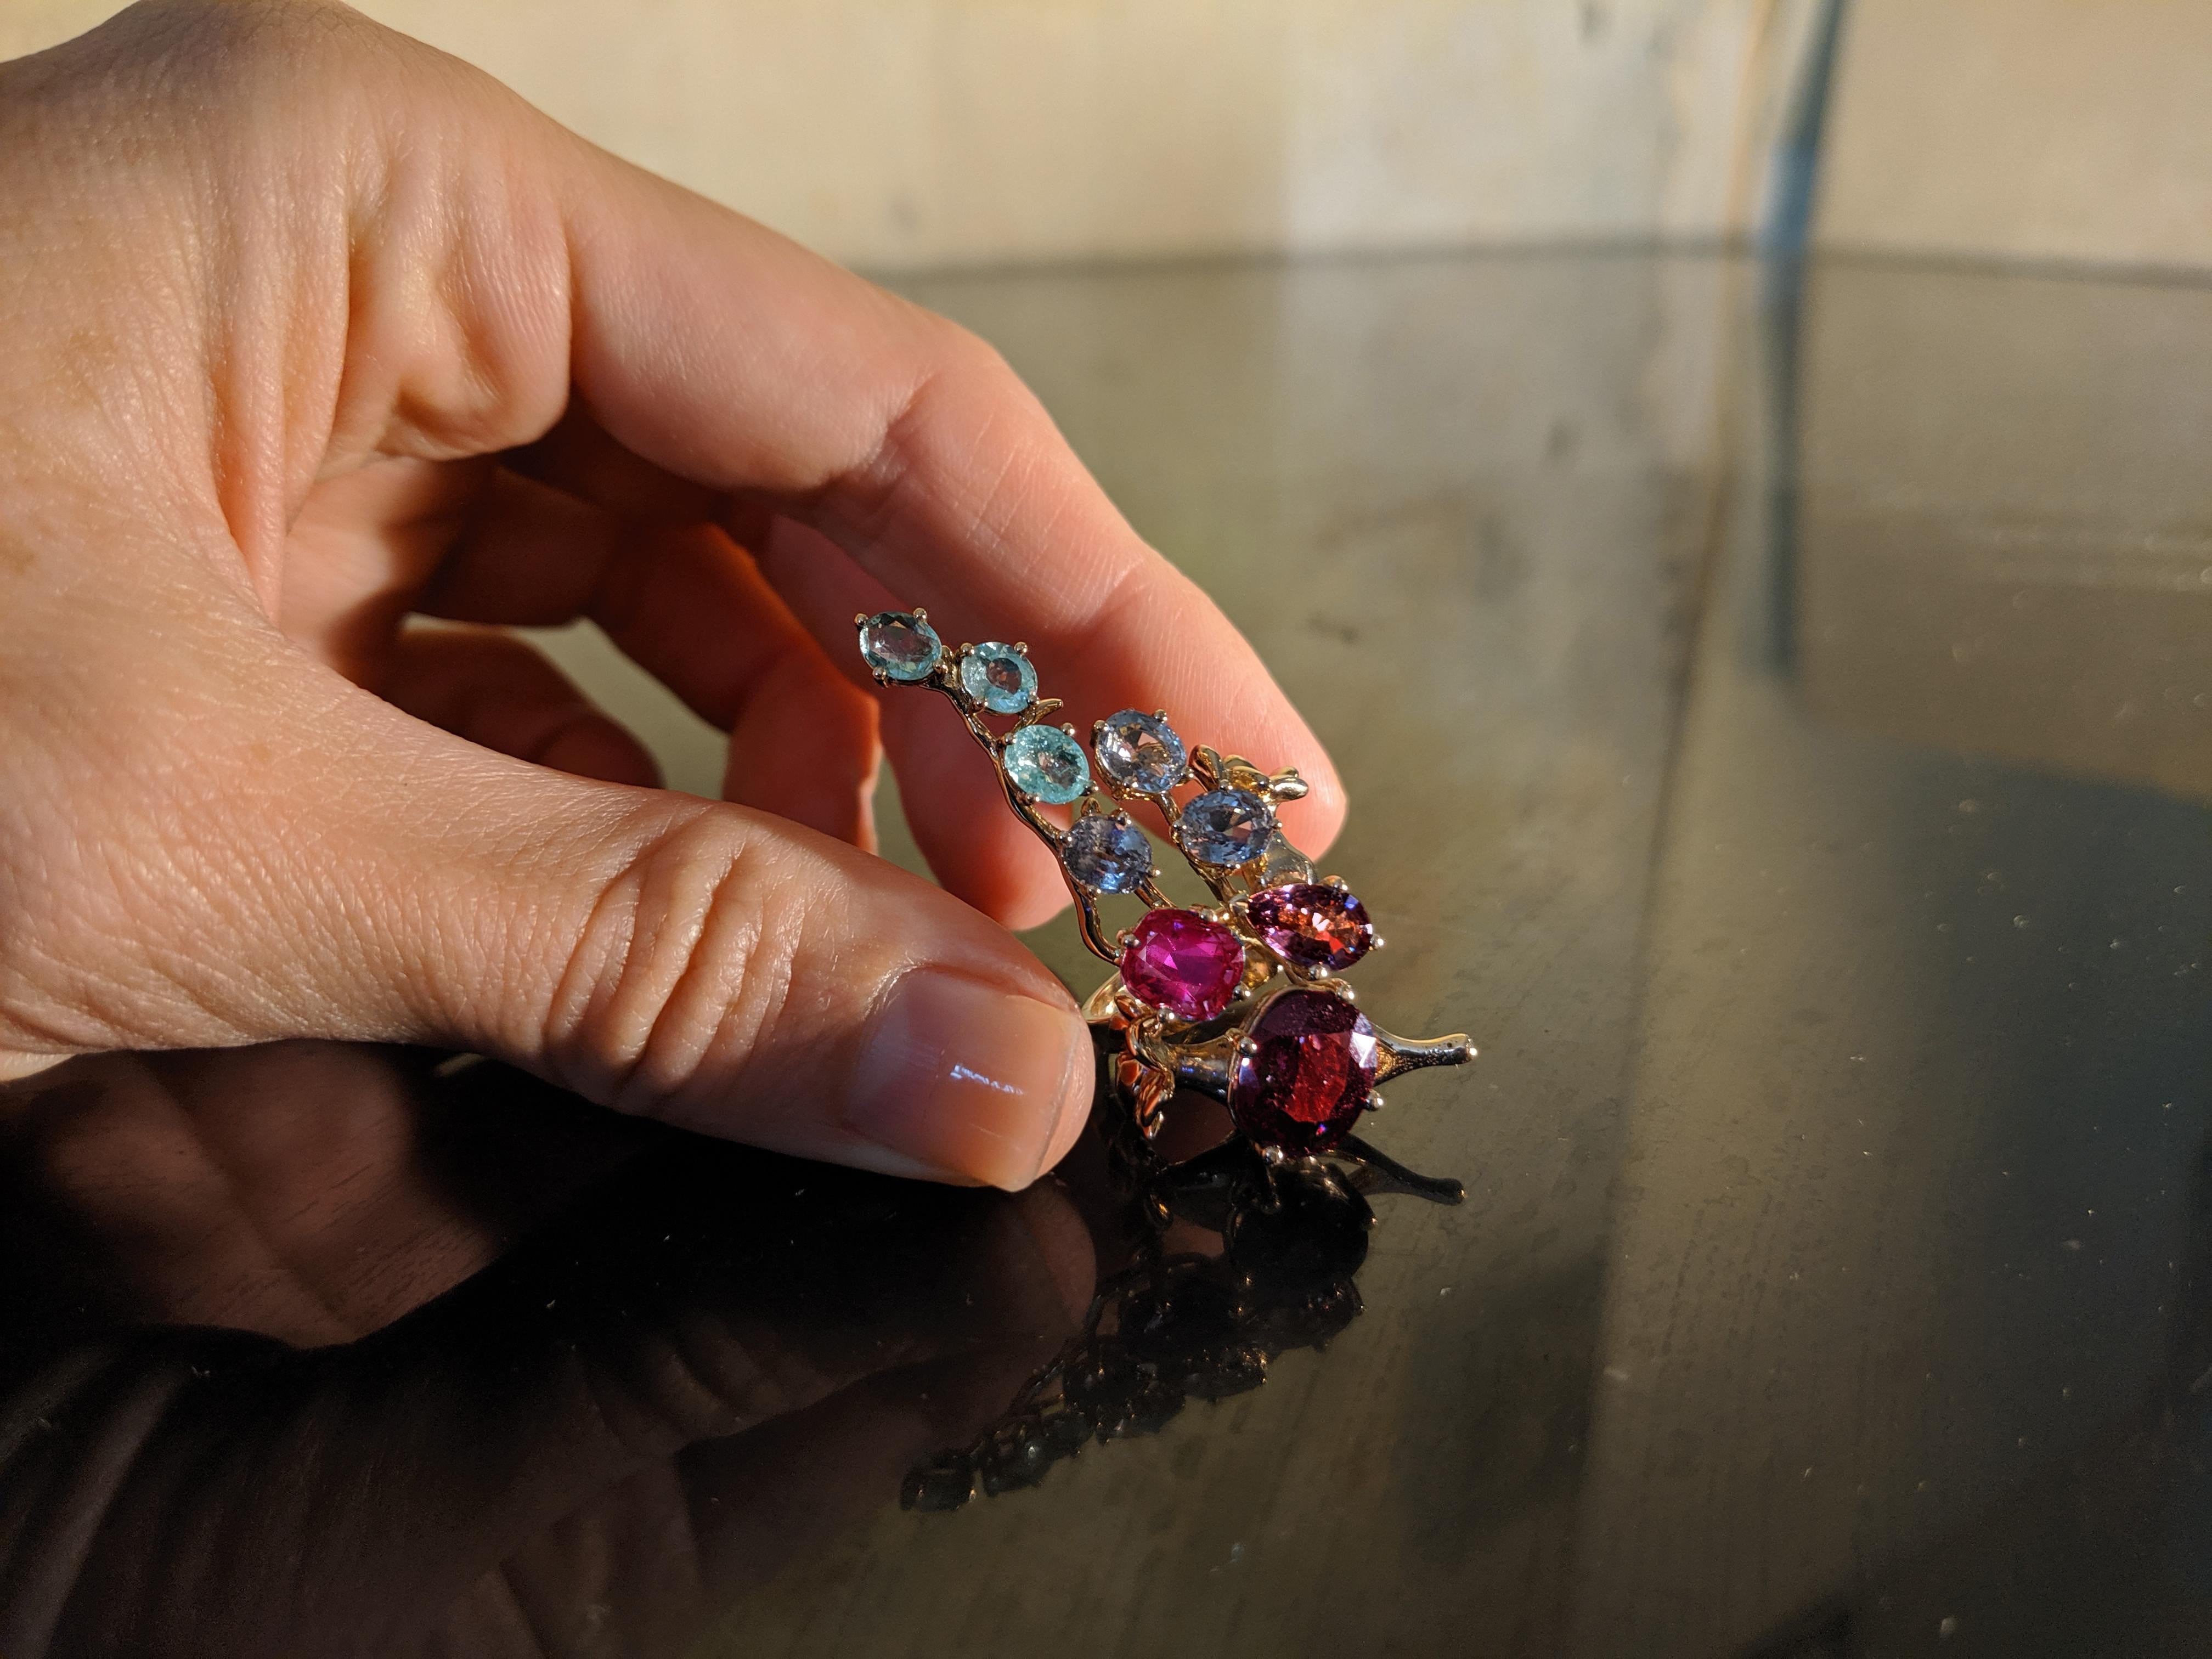 This Tobacco Flower brooch is crafted from 18 karat rose gold and adorned with author's selection of gems. It features an oval GRS Certified Pigeon's Blood Red ruby from Burma (0.98 Ct), measuring 5.93 x 4.92 x 4.17 mm, as well as big oval and pear